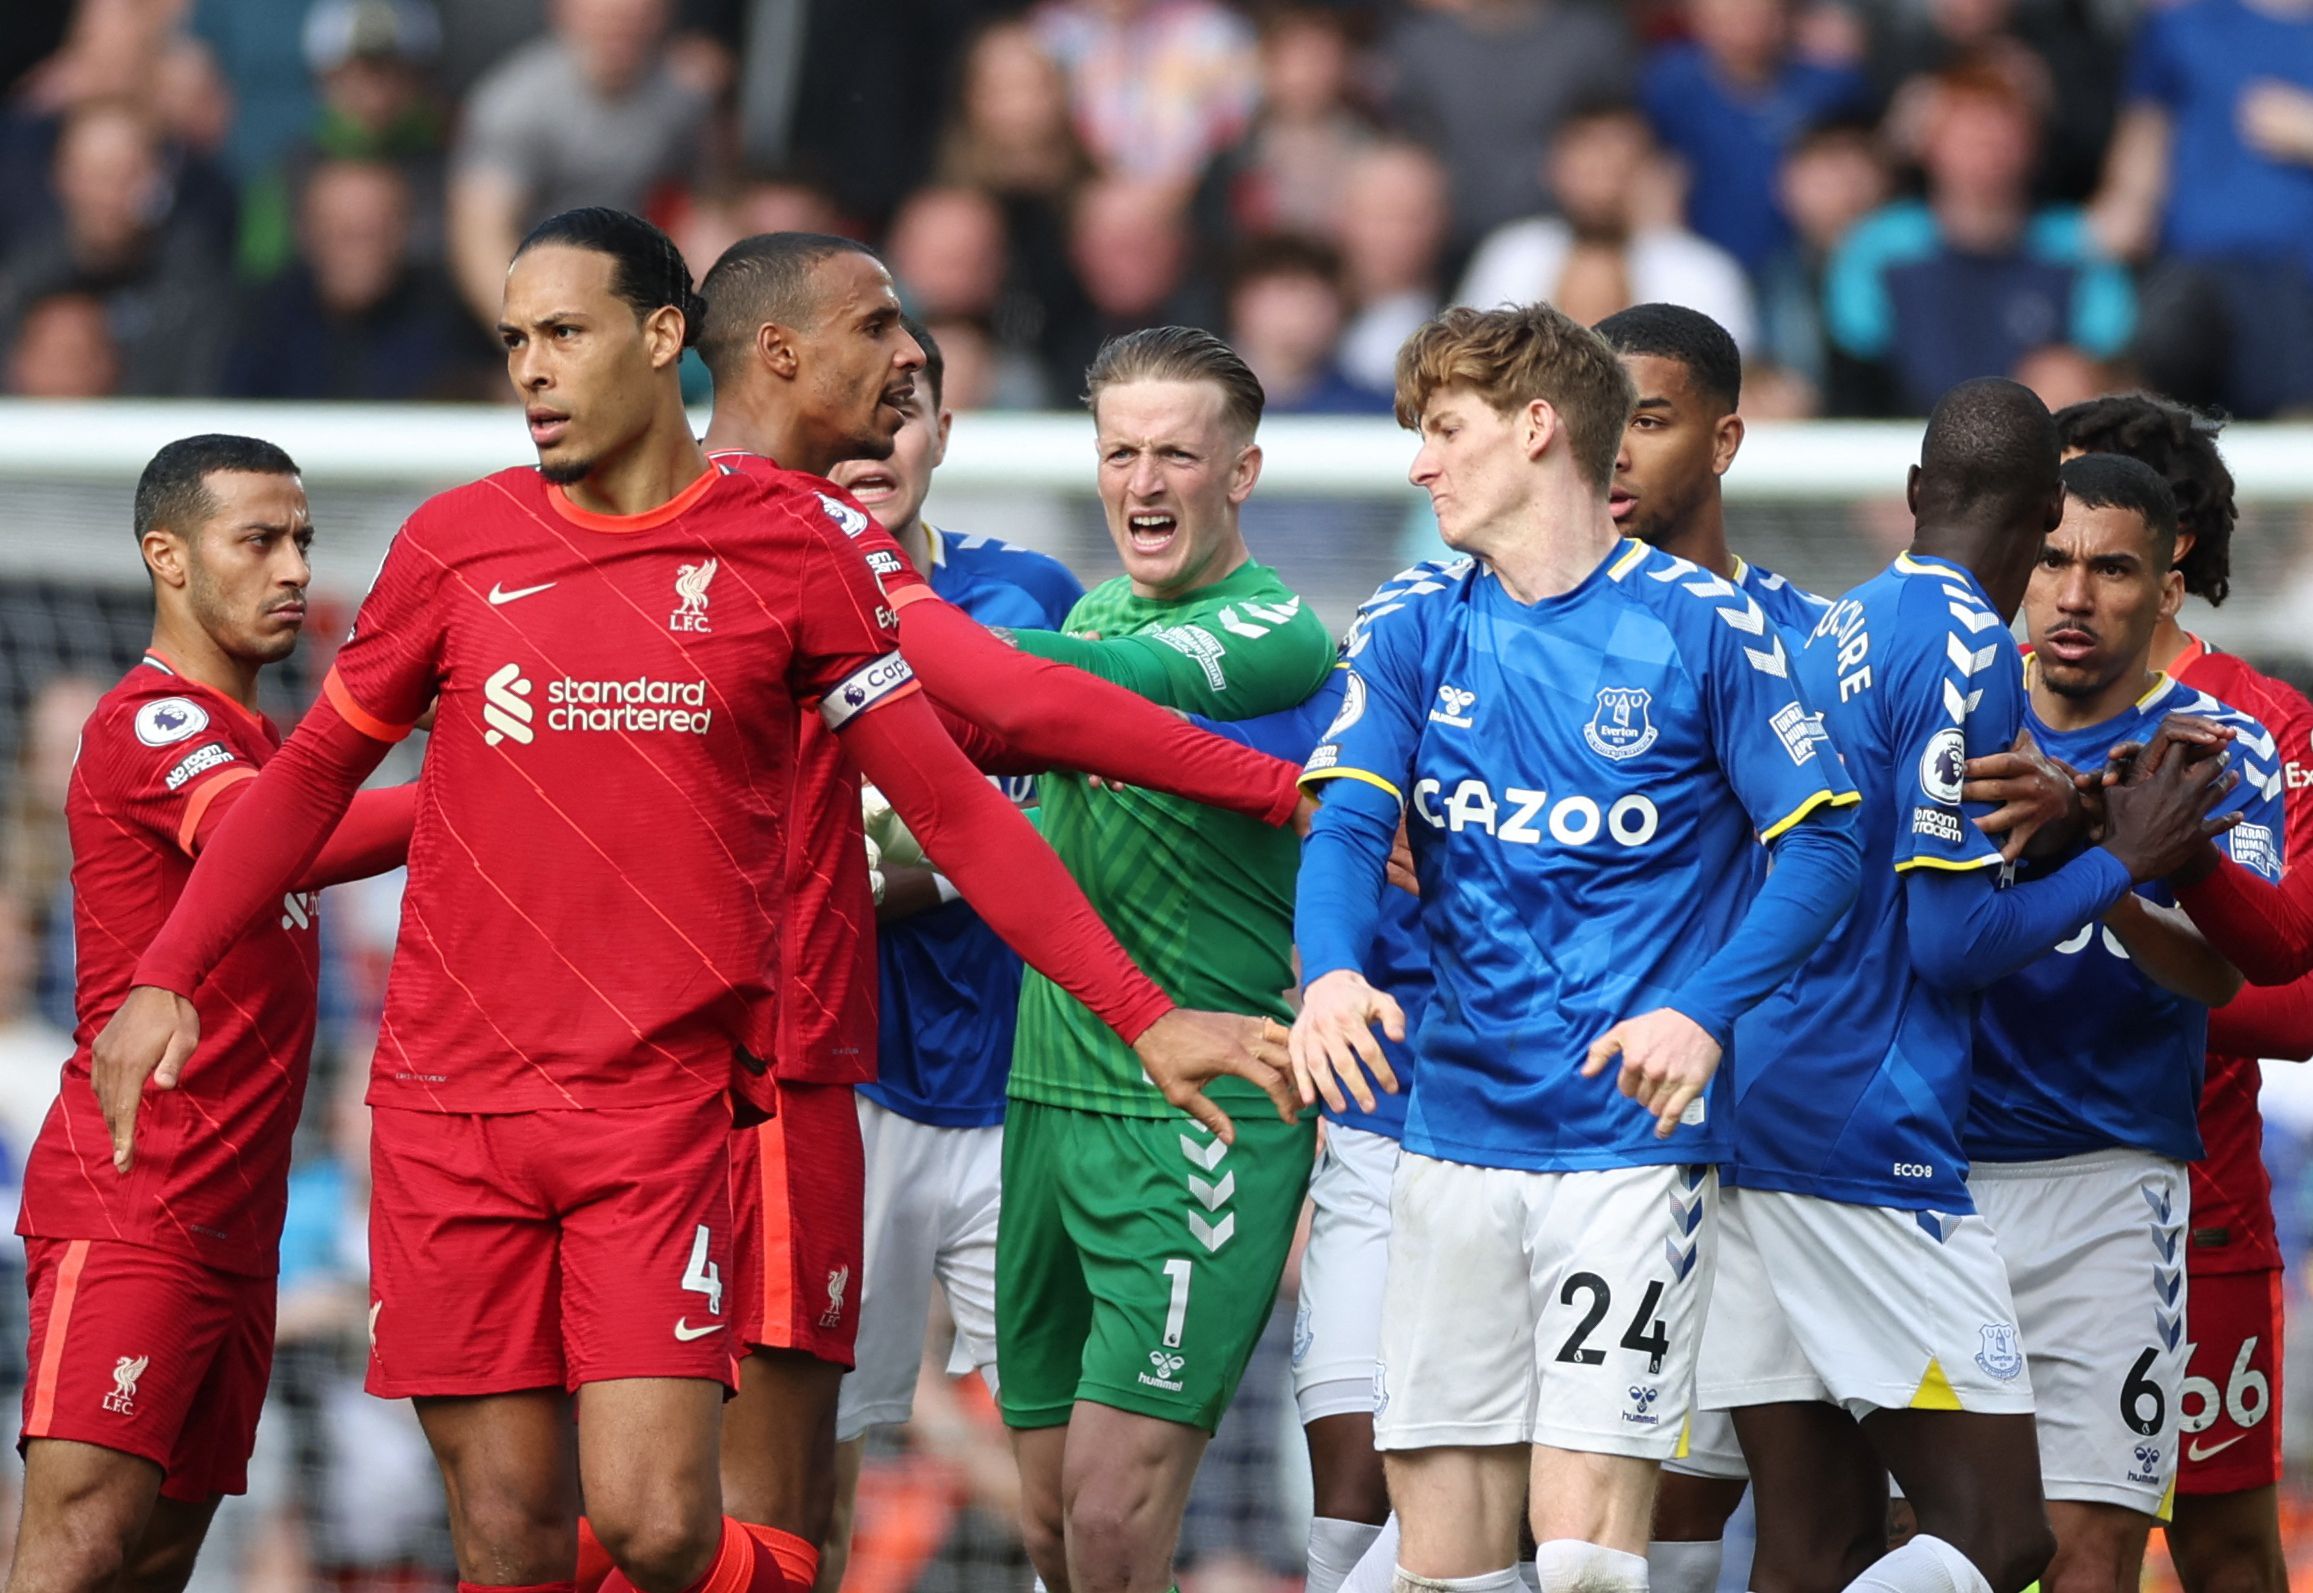 Soccer Football - Premier League - Liverpool v Everton - Anfield, Liverpool, Britain - April 24, 2022  Liverpool's Joel Matip clashes with Everton's Anthony Gordon as Liverpool's Virgil van Dijk and Everton's Jordan Pickford intervene REUTERS/Phil Noble EDITORIAL USE ONLY. No use with unauthorized audio, video, data, fixture lists, club/league logos or 'live' services. Online in-match use limited to 75 images, no video emulation. No use in betting, games or single club /league/player publication